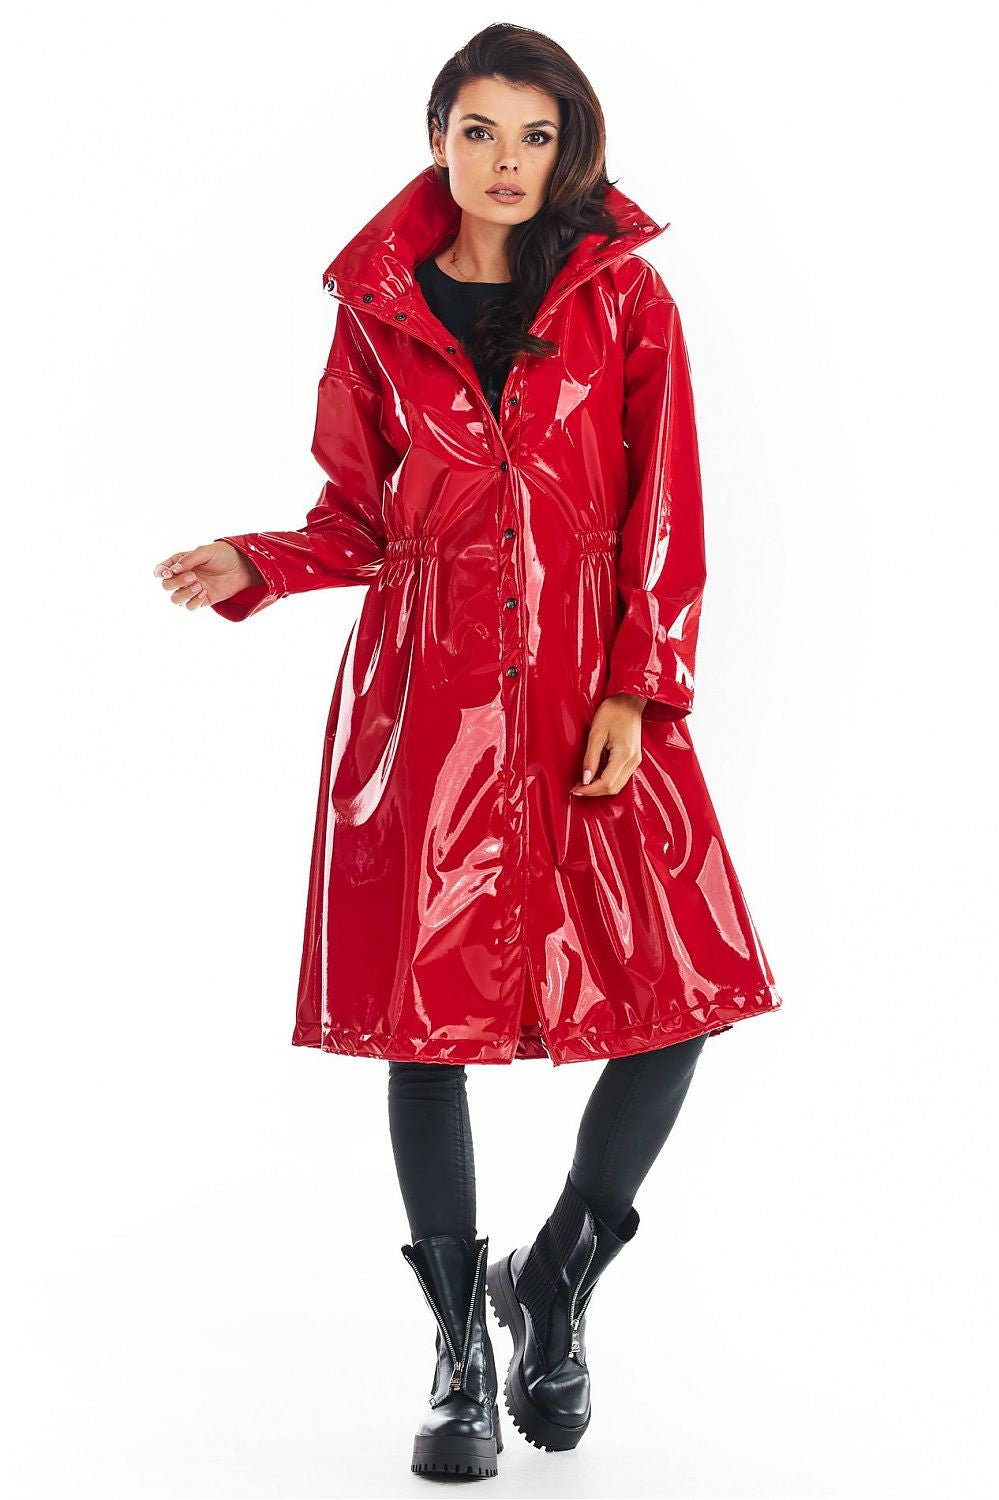 Awama Red High Collar Vinyl Coat The Groovalution